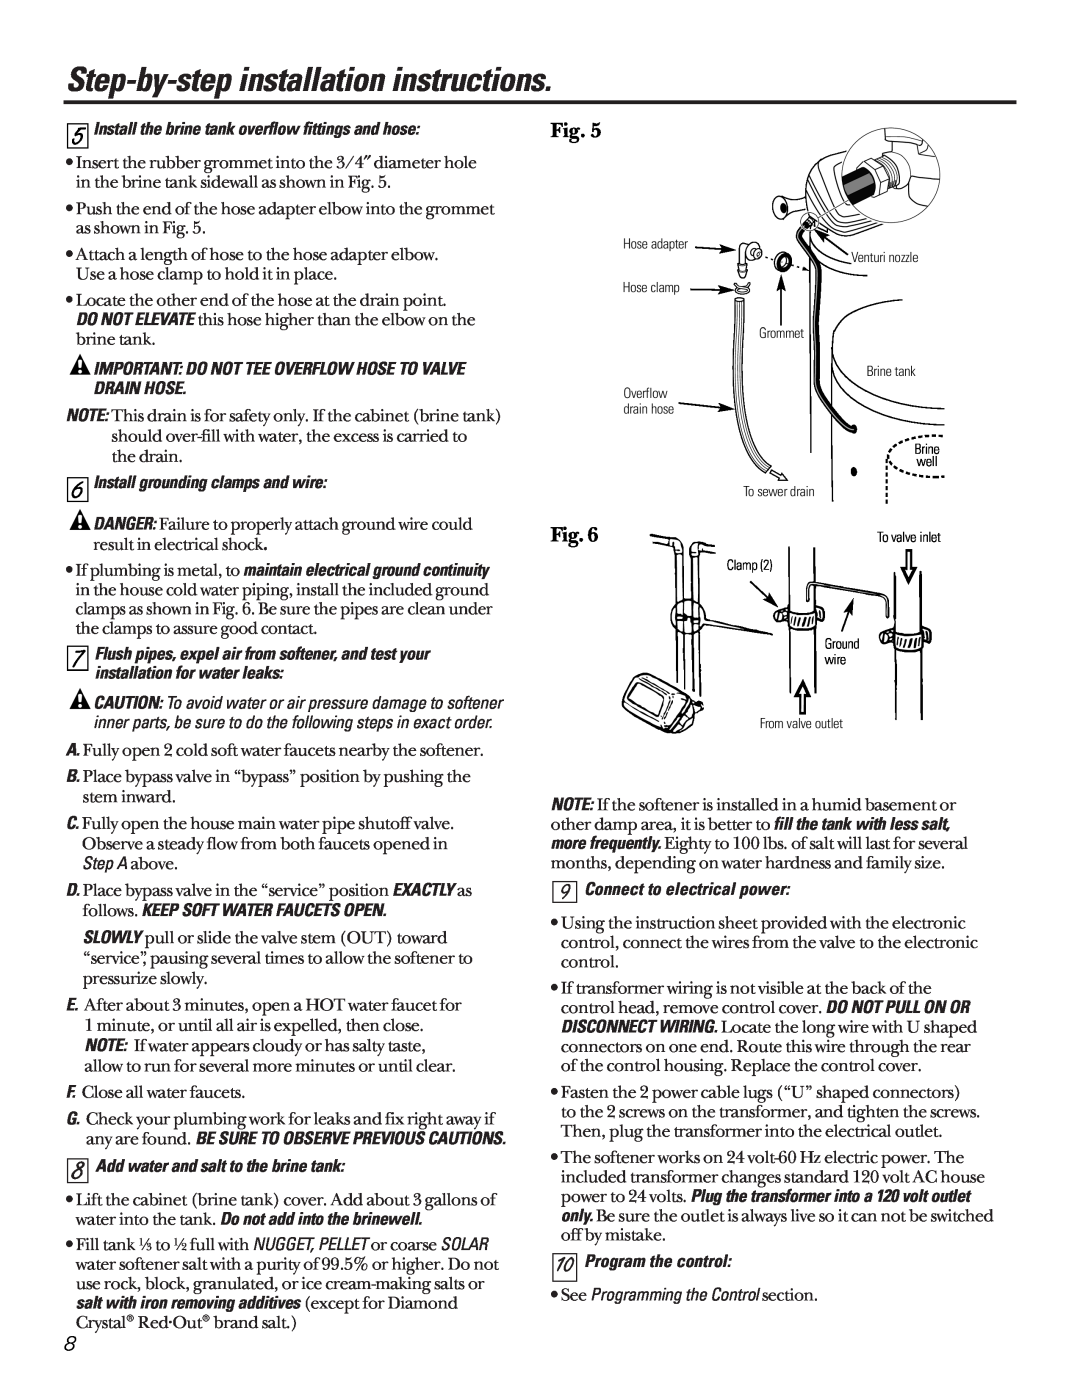 GE GNSF39A01, GNSF48A01 Step-by-step installation instructions, Install the brine tank overflow fittings and hose 